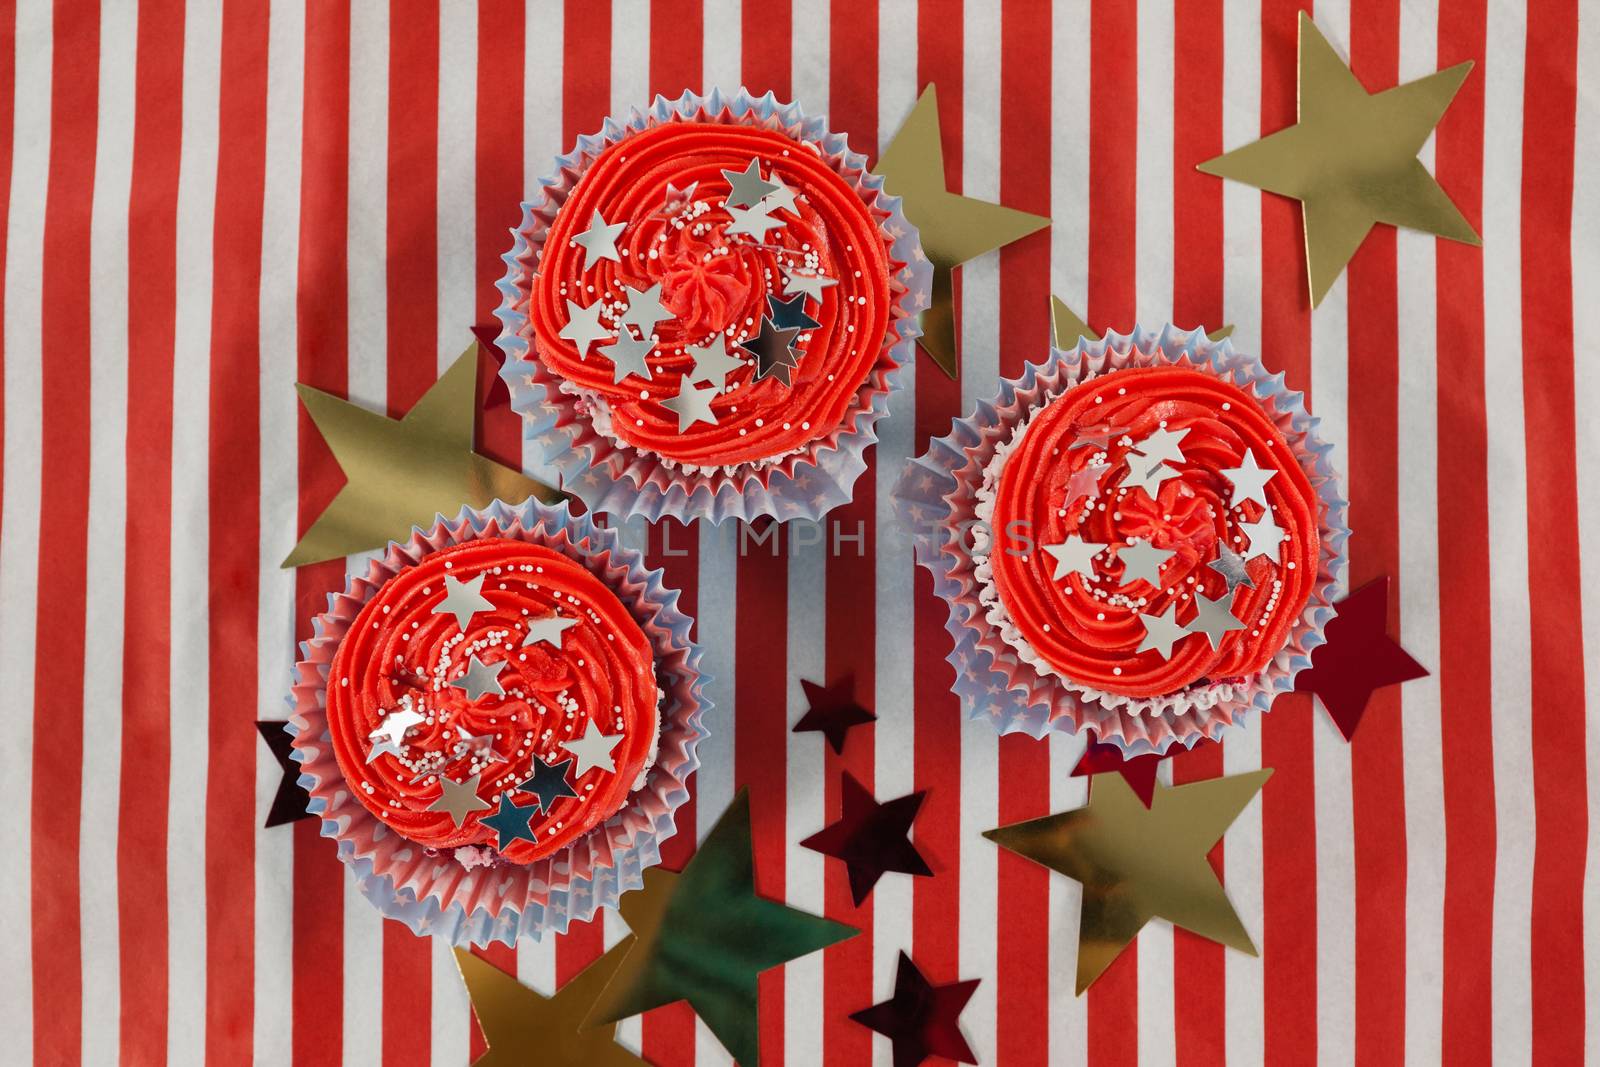 Close-up of decorated cupcakes with 4th july theme